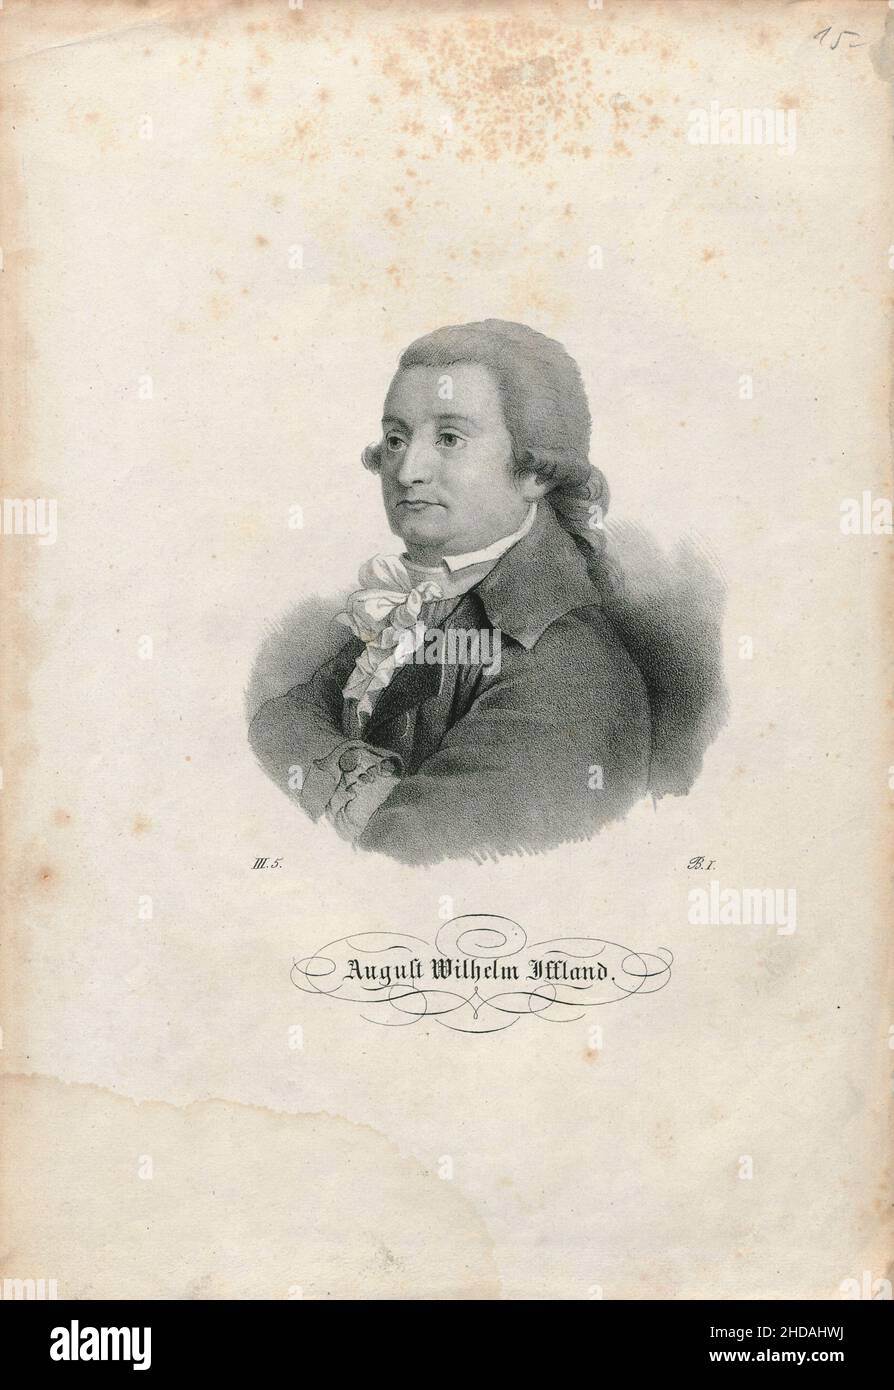 Engraving portrait of August Wilhelm Iffland. 1840 August Wilhelm Iffland (1759 – 1814) was a German actor and dramatic author. Stock Photo